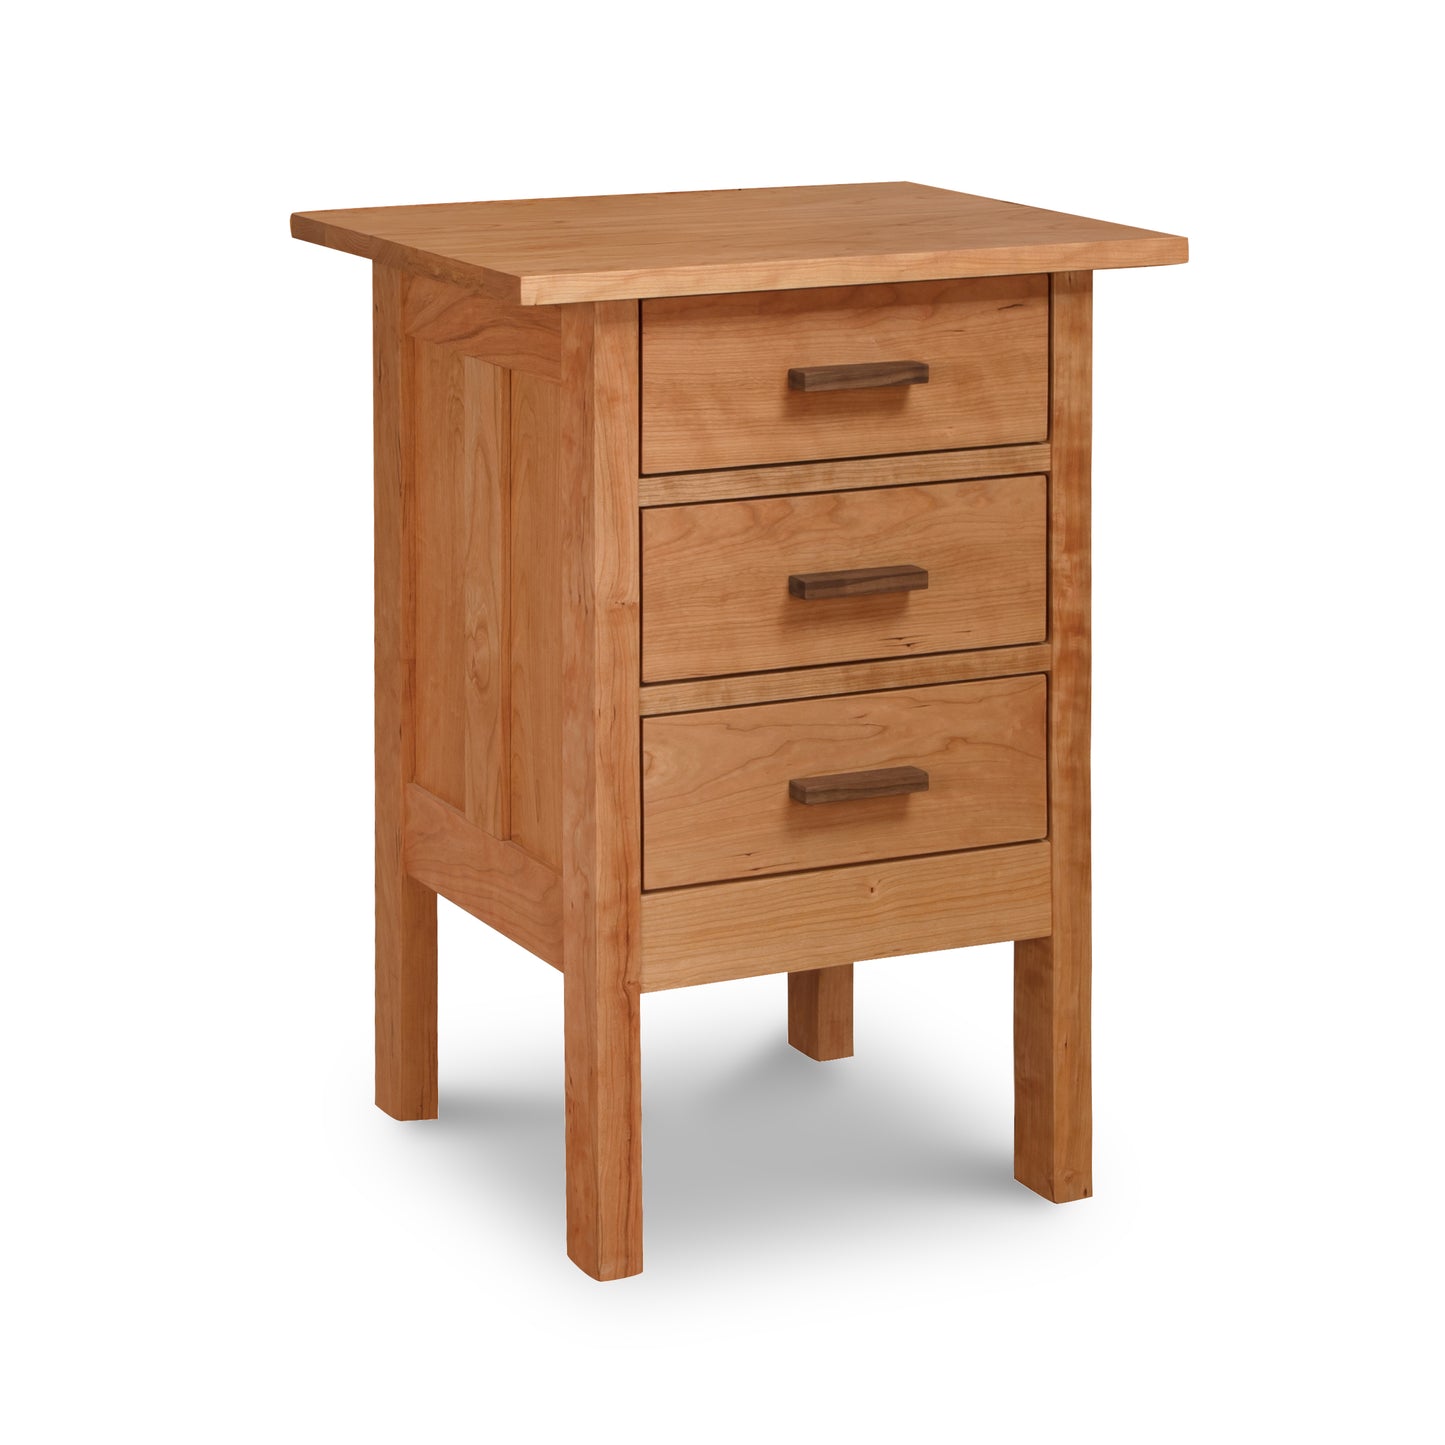 A Vermont Furniture Designs Modern Craftsman 3-Drawer Nightstand, perfect for a contemporary bedroom, featuring three drawers for ample storage.